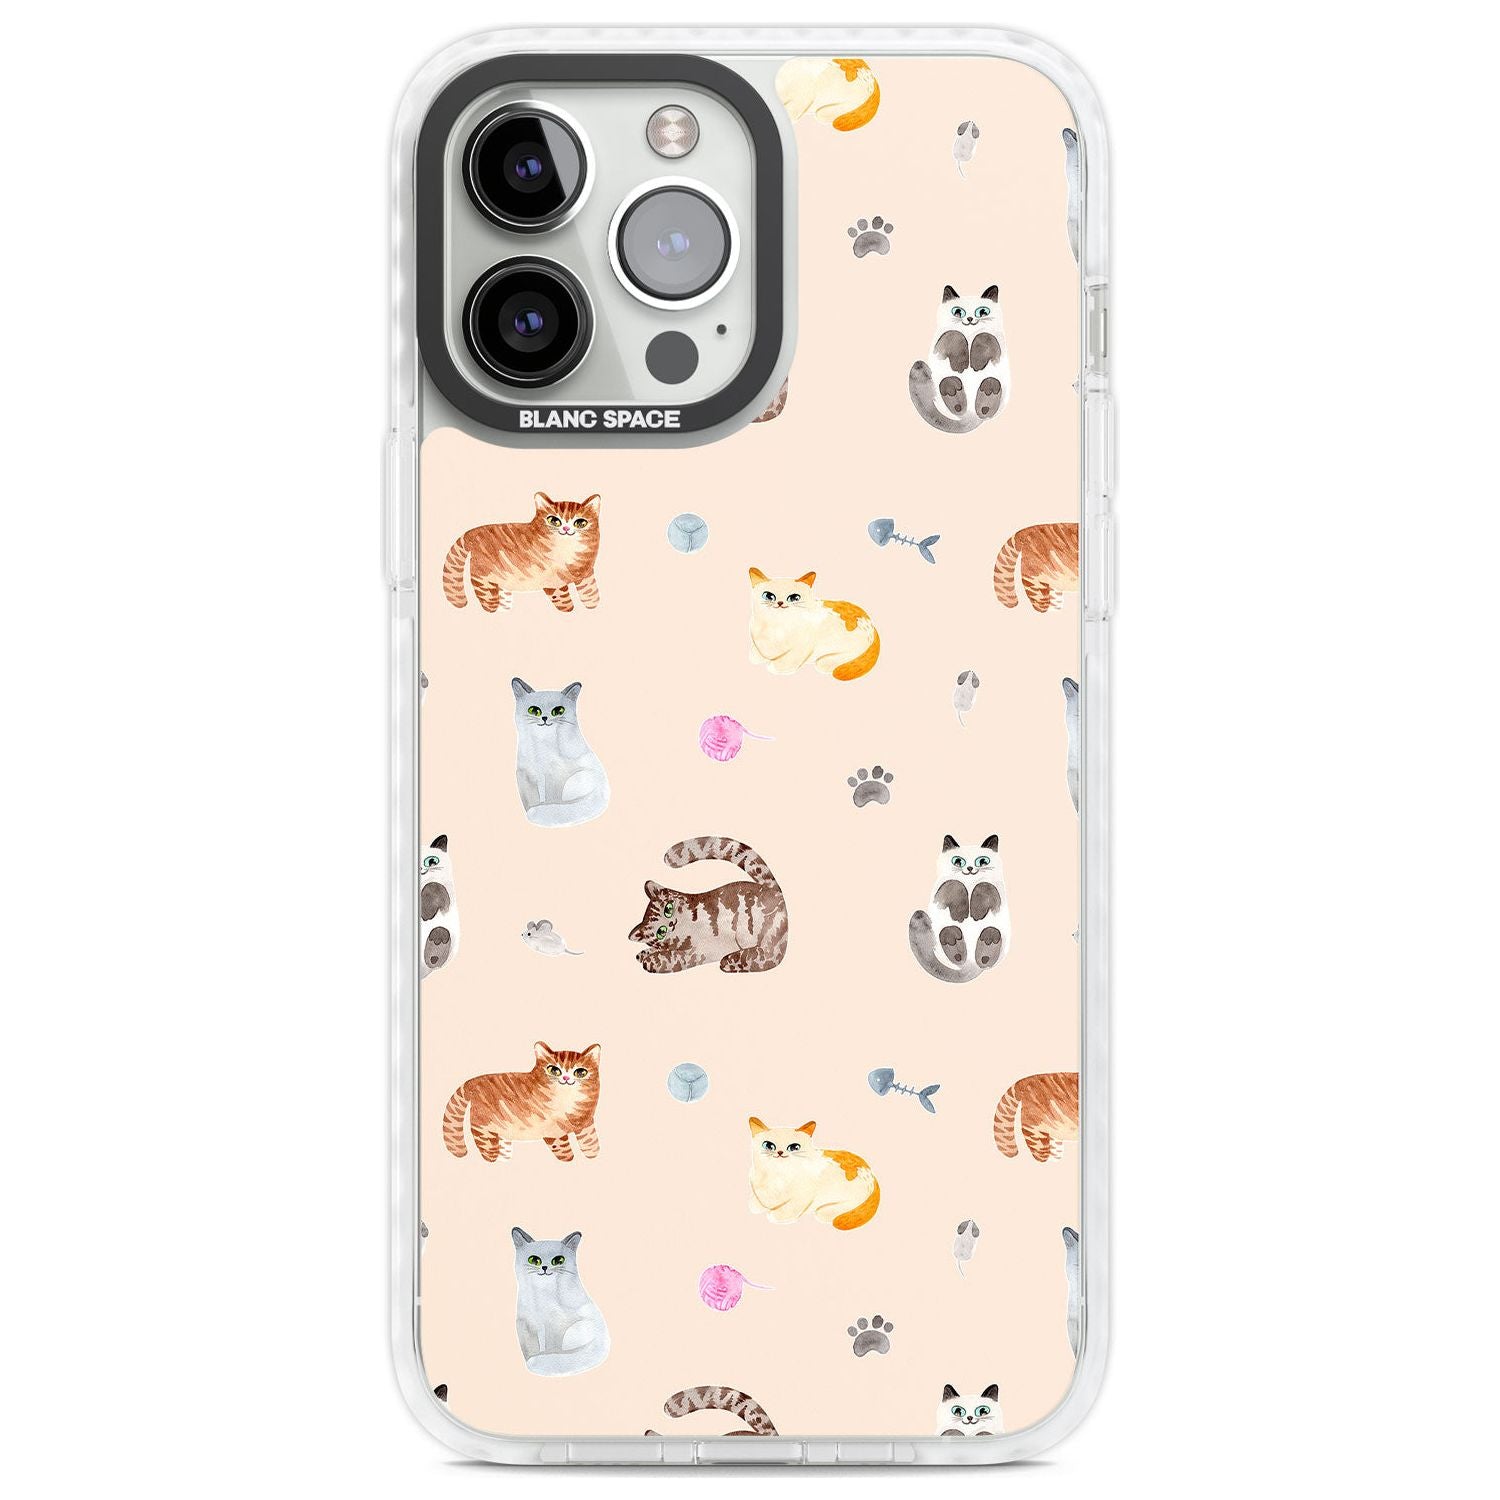 Cats with Toys Phone Case iPhone 13 Pro Max / Impact Case,iPhone 14 Pro Max / Impact Case Blanc Space